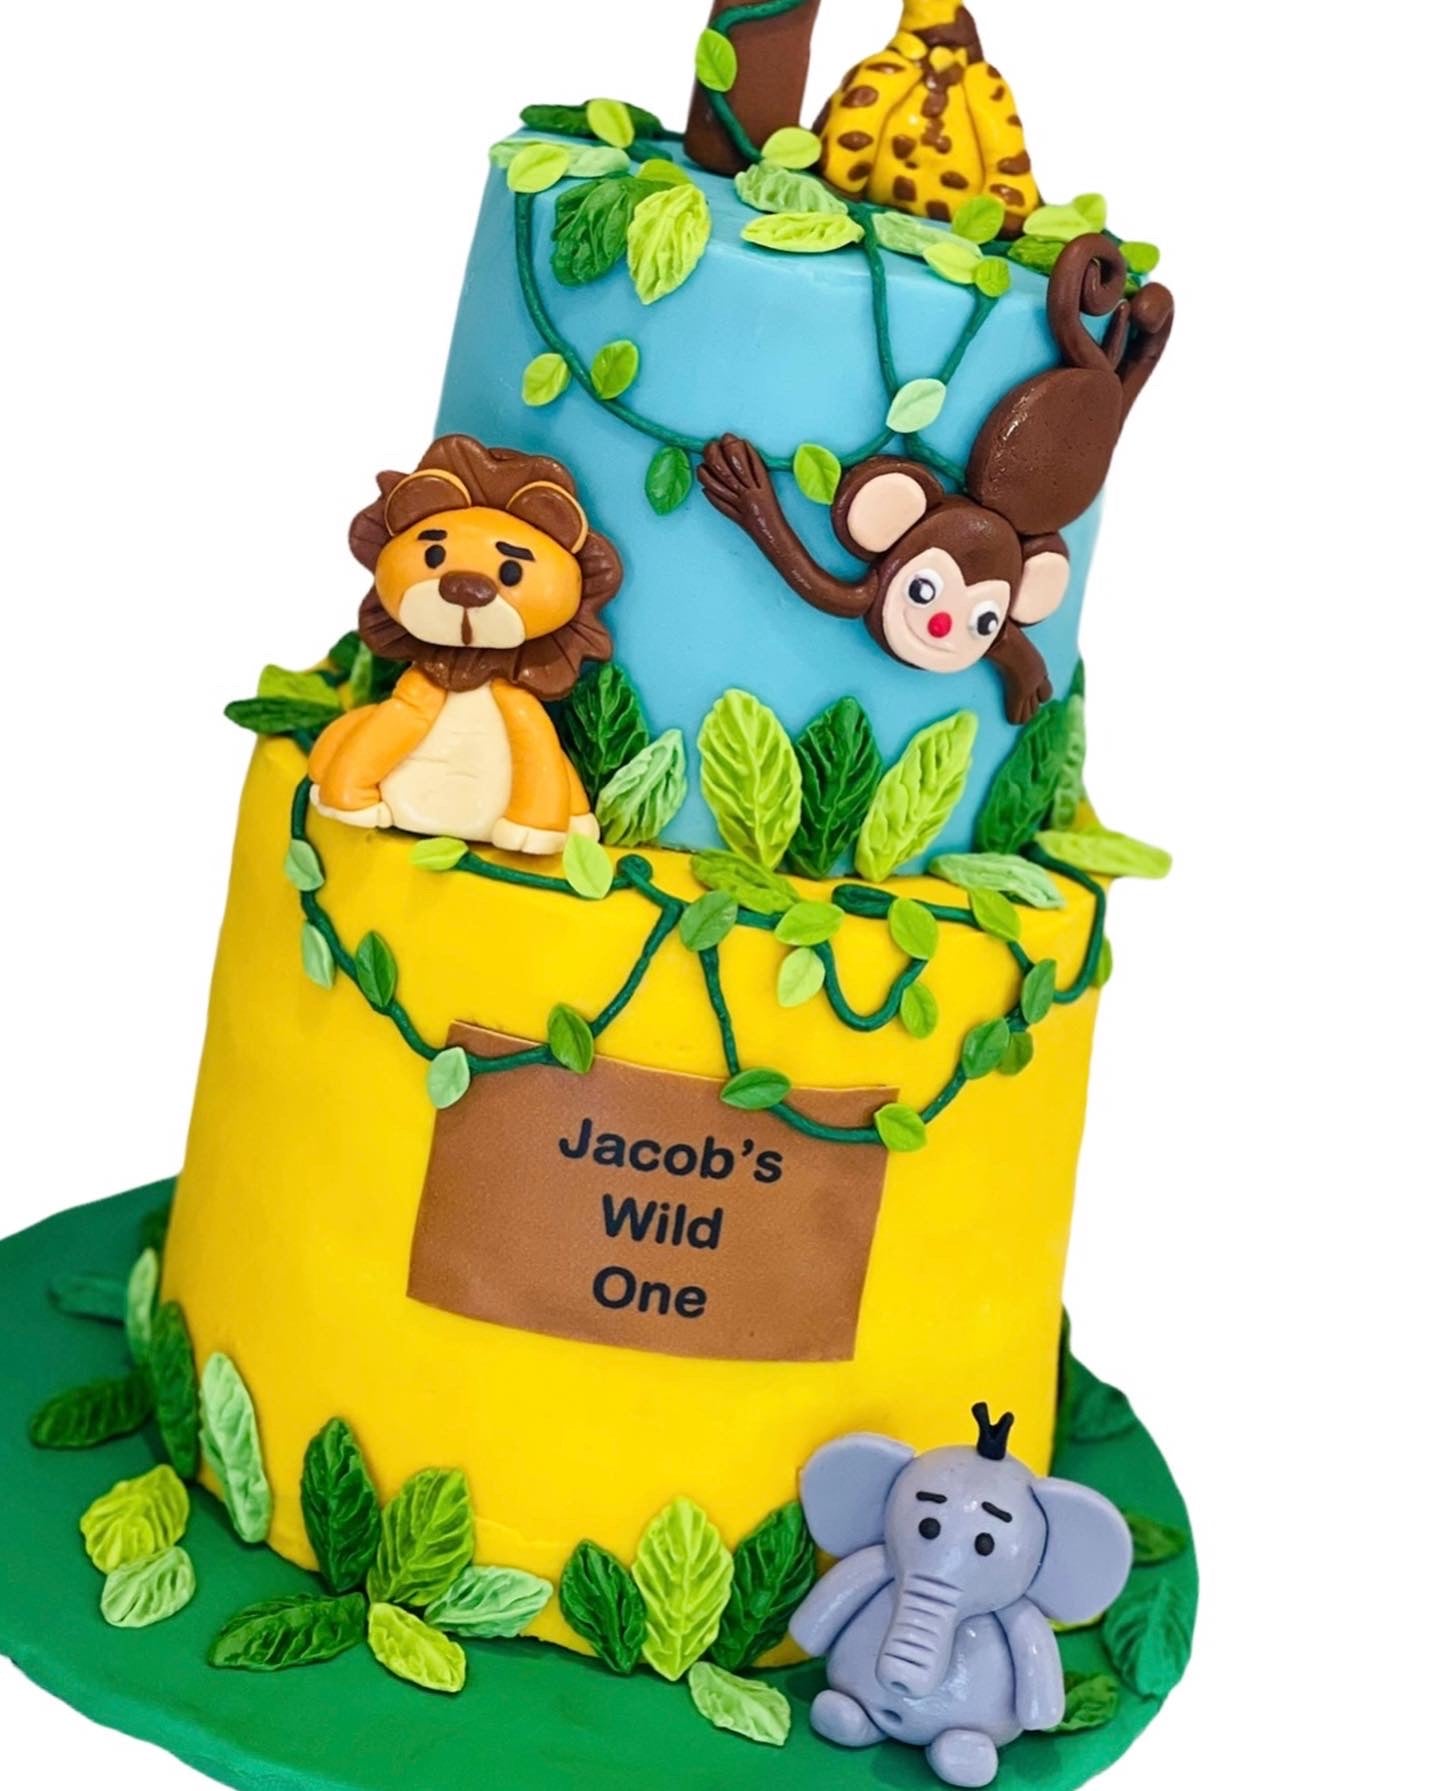 I made this safari themed cake at work today! I hate fondant but I'm happy  with how the lil lion turned out he's so cute 🥰 : r/cakedecorating